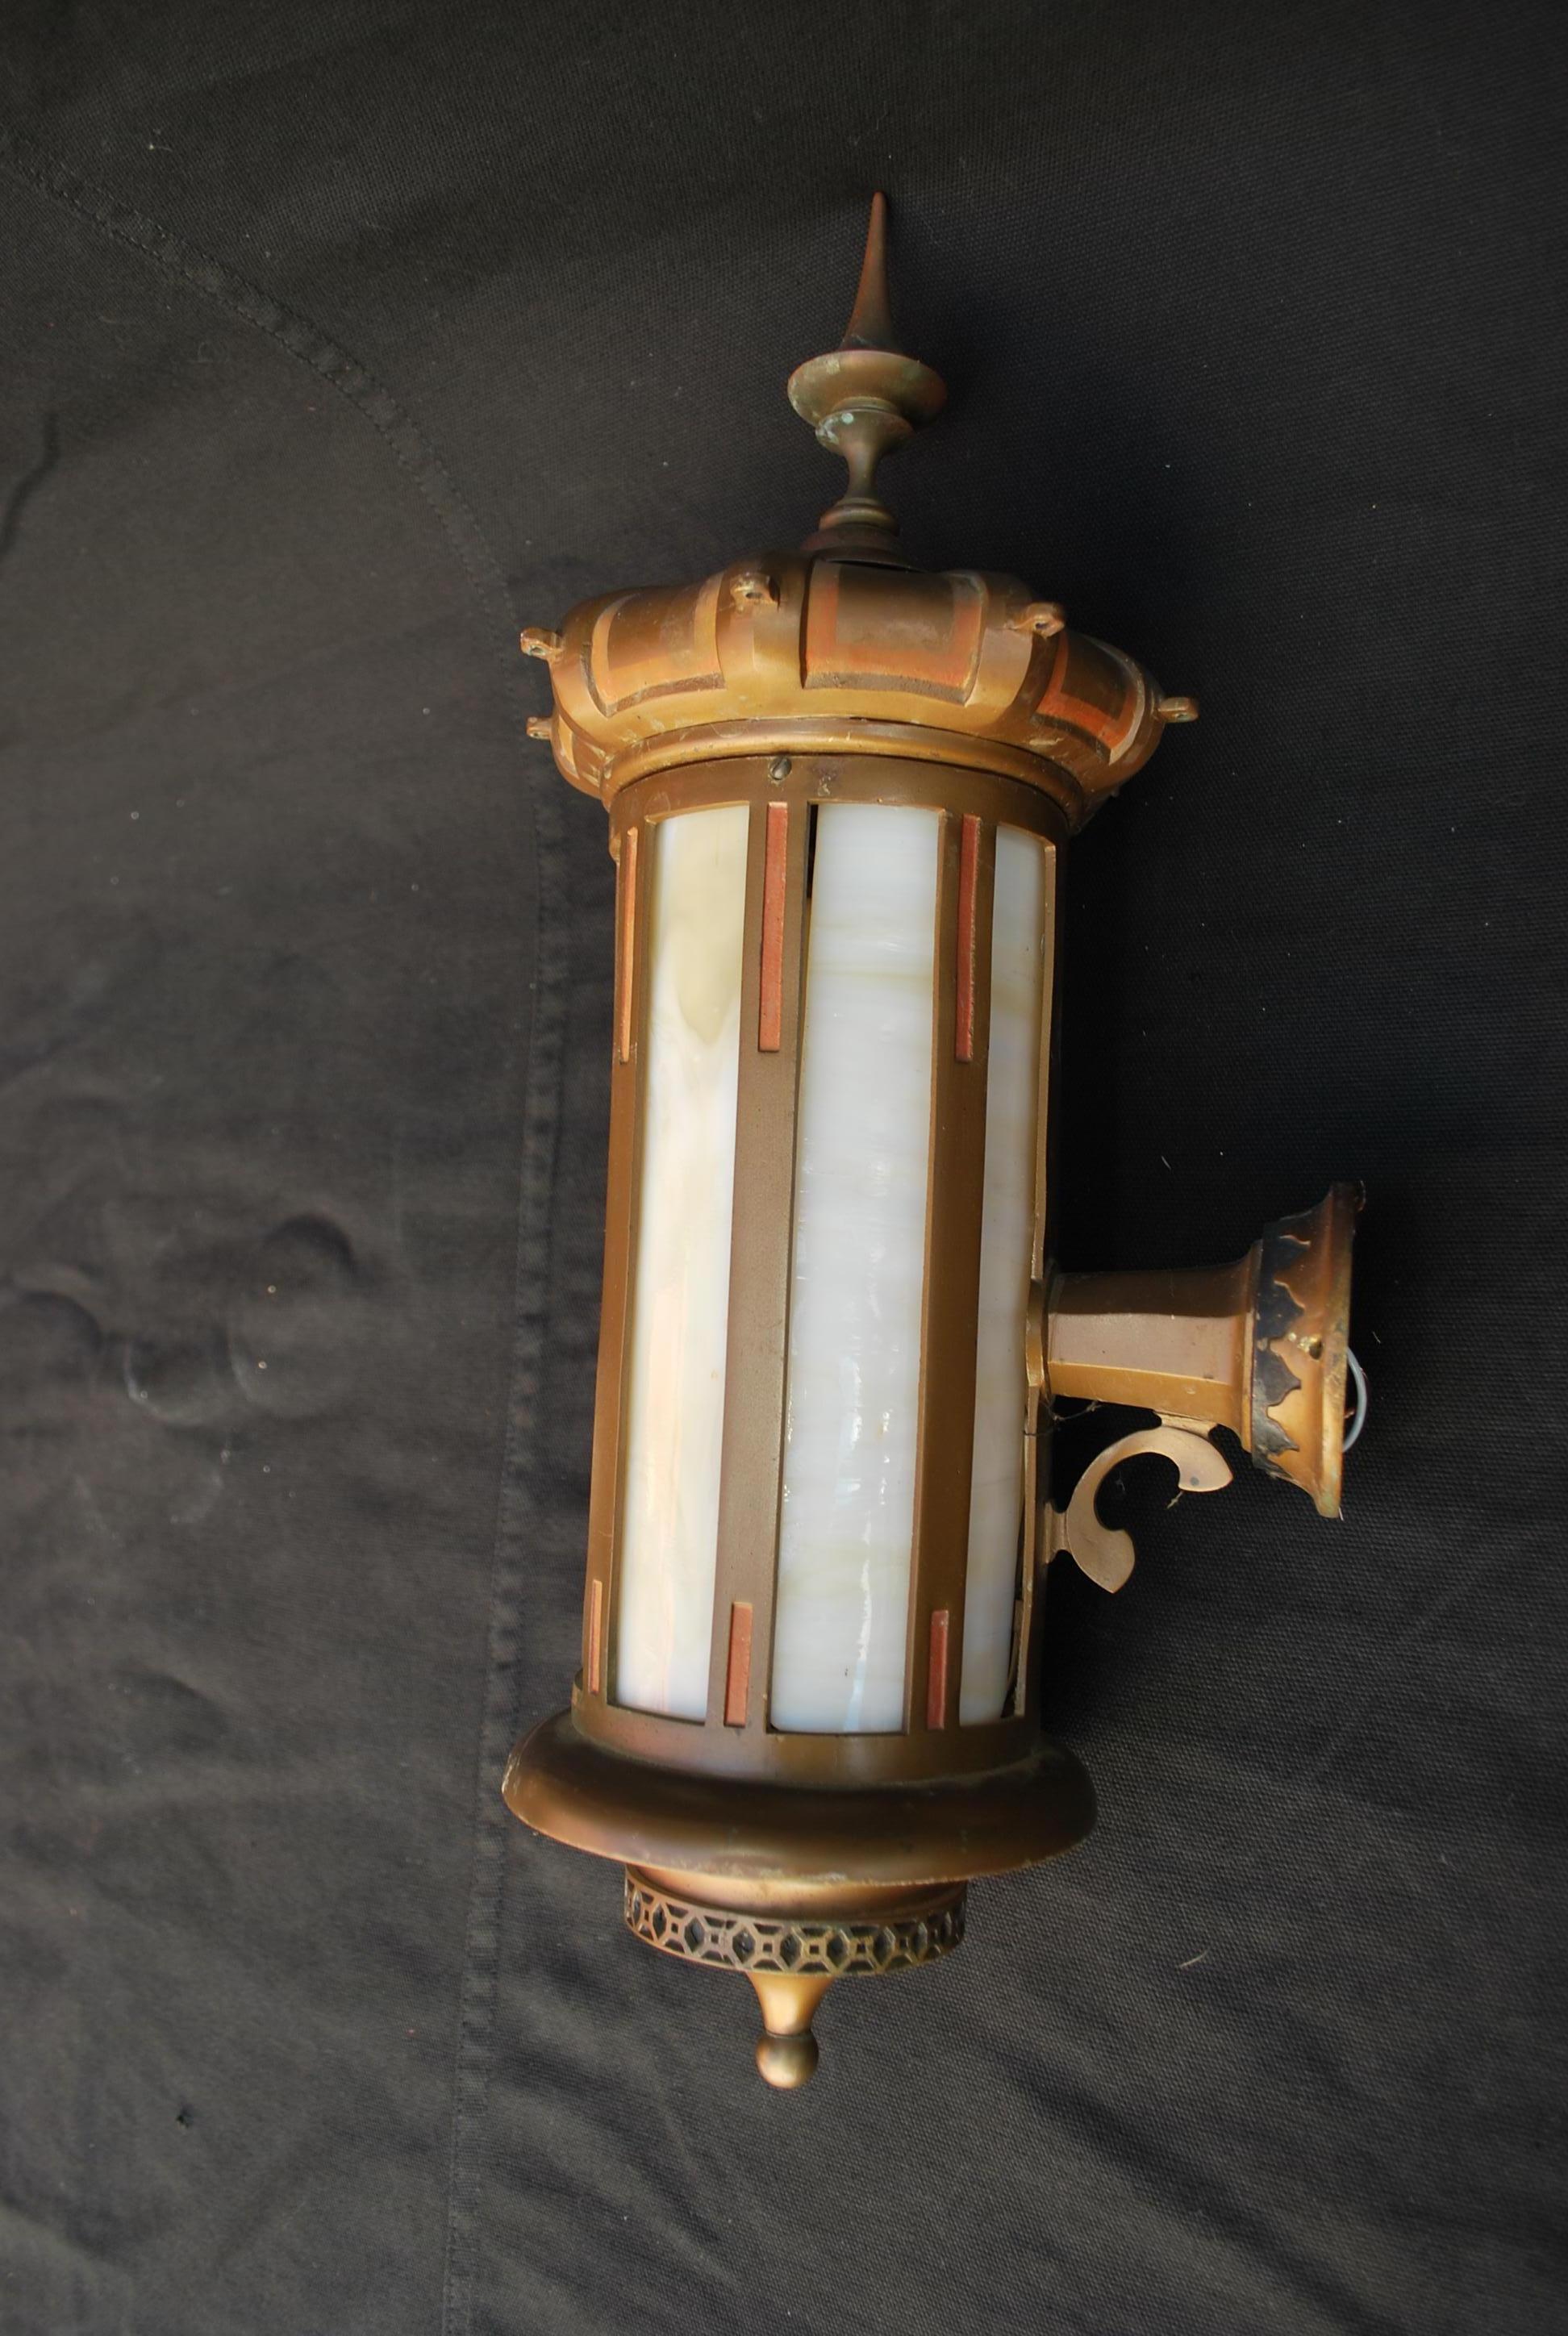 A beautiful and very rare pair of 1920's sconces, I think they came from a temple or masonic temple, I have been selling antiques sconces for 27 years, this is the first time I came across such rare sconces, beware they is a crack in the glass, (see